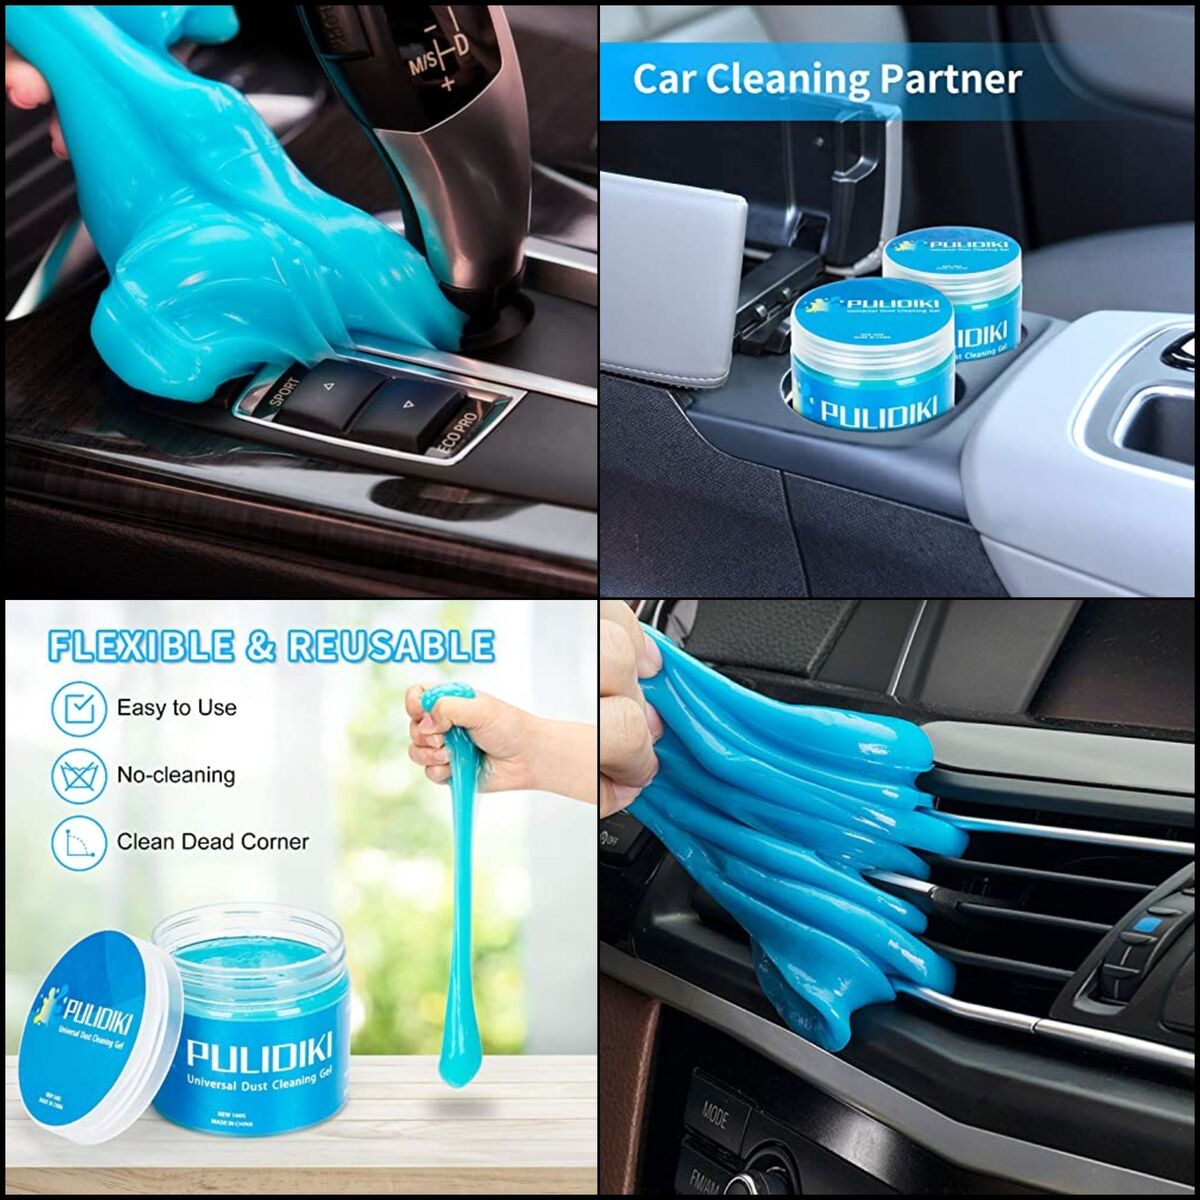 How to clean and sanitise your car interior | CAR Magazine